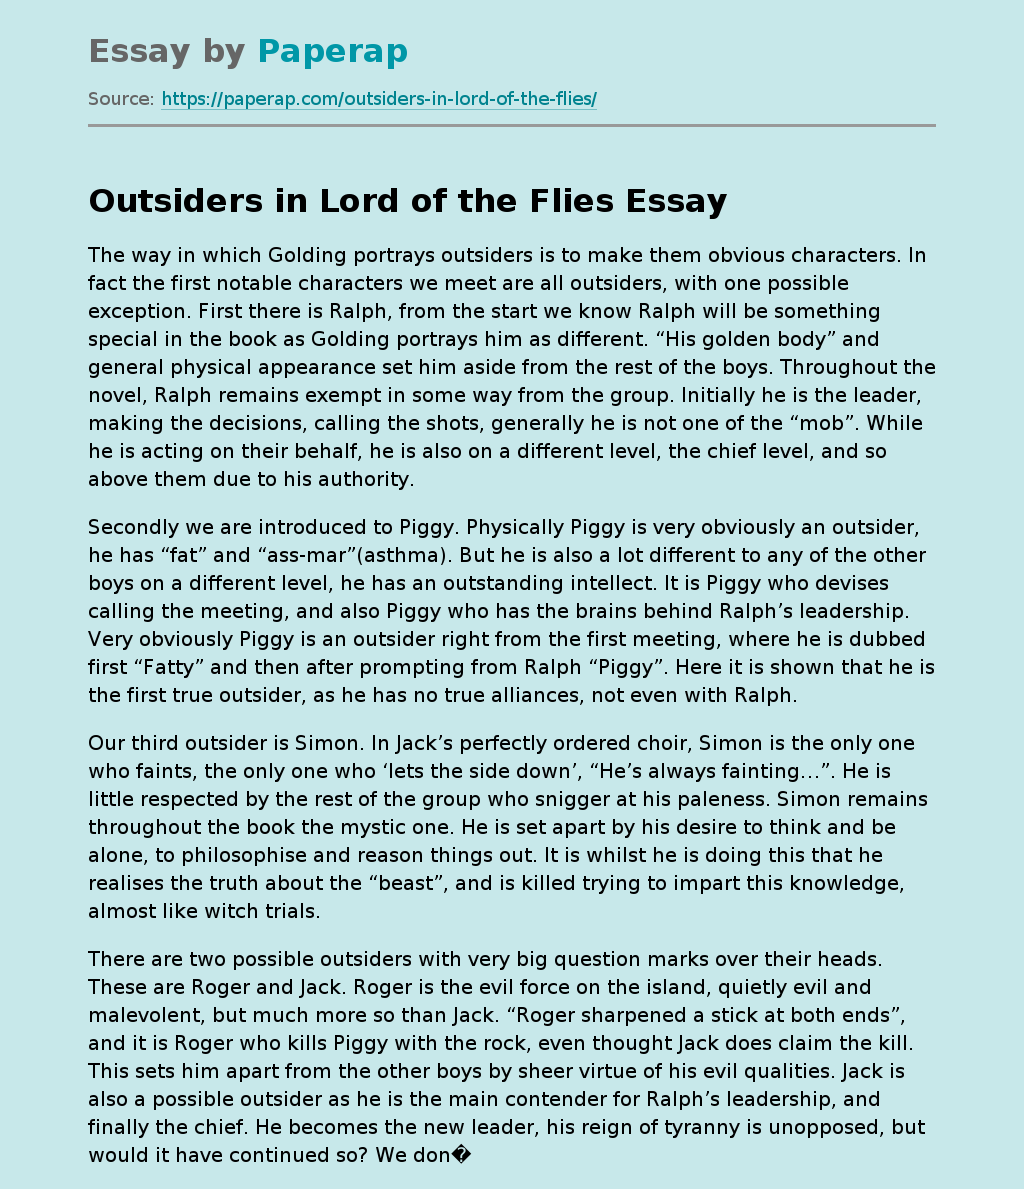 Outsiders in Lord of the Flies